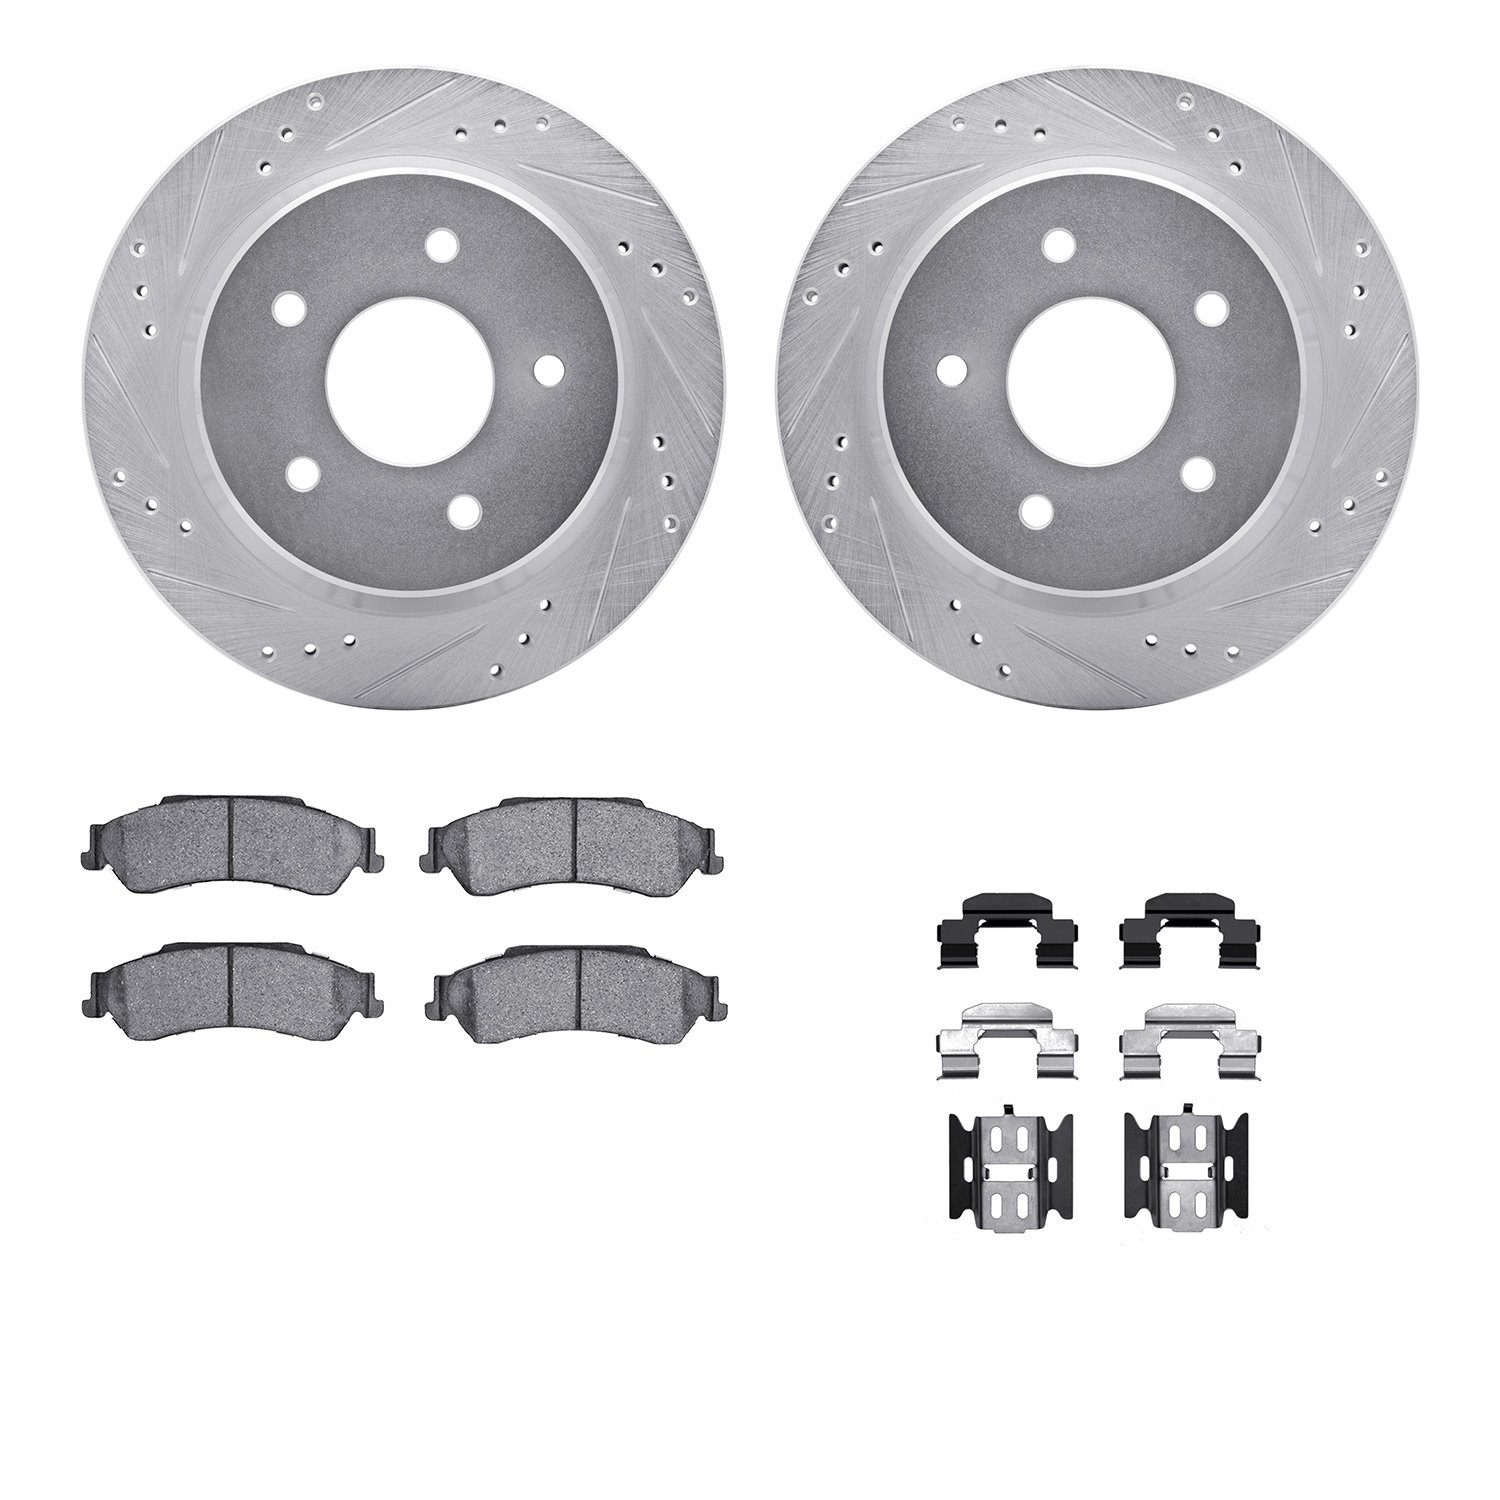 7412-48021 Drilled/Slotted Brake Rotors with Ultimate-Duty Brake Pads Kit & Hardware [Silver], 1998-2005 GM, Position: Rear